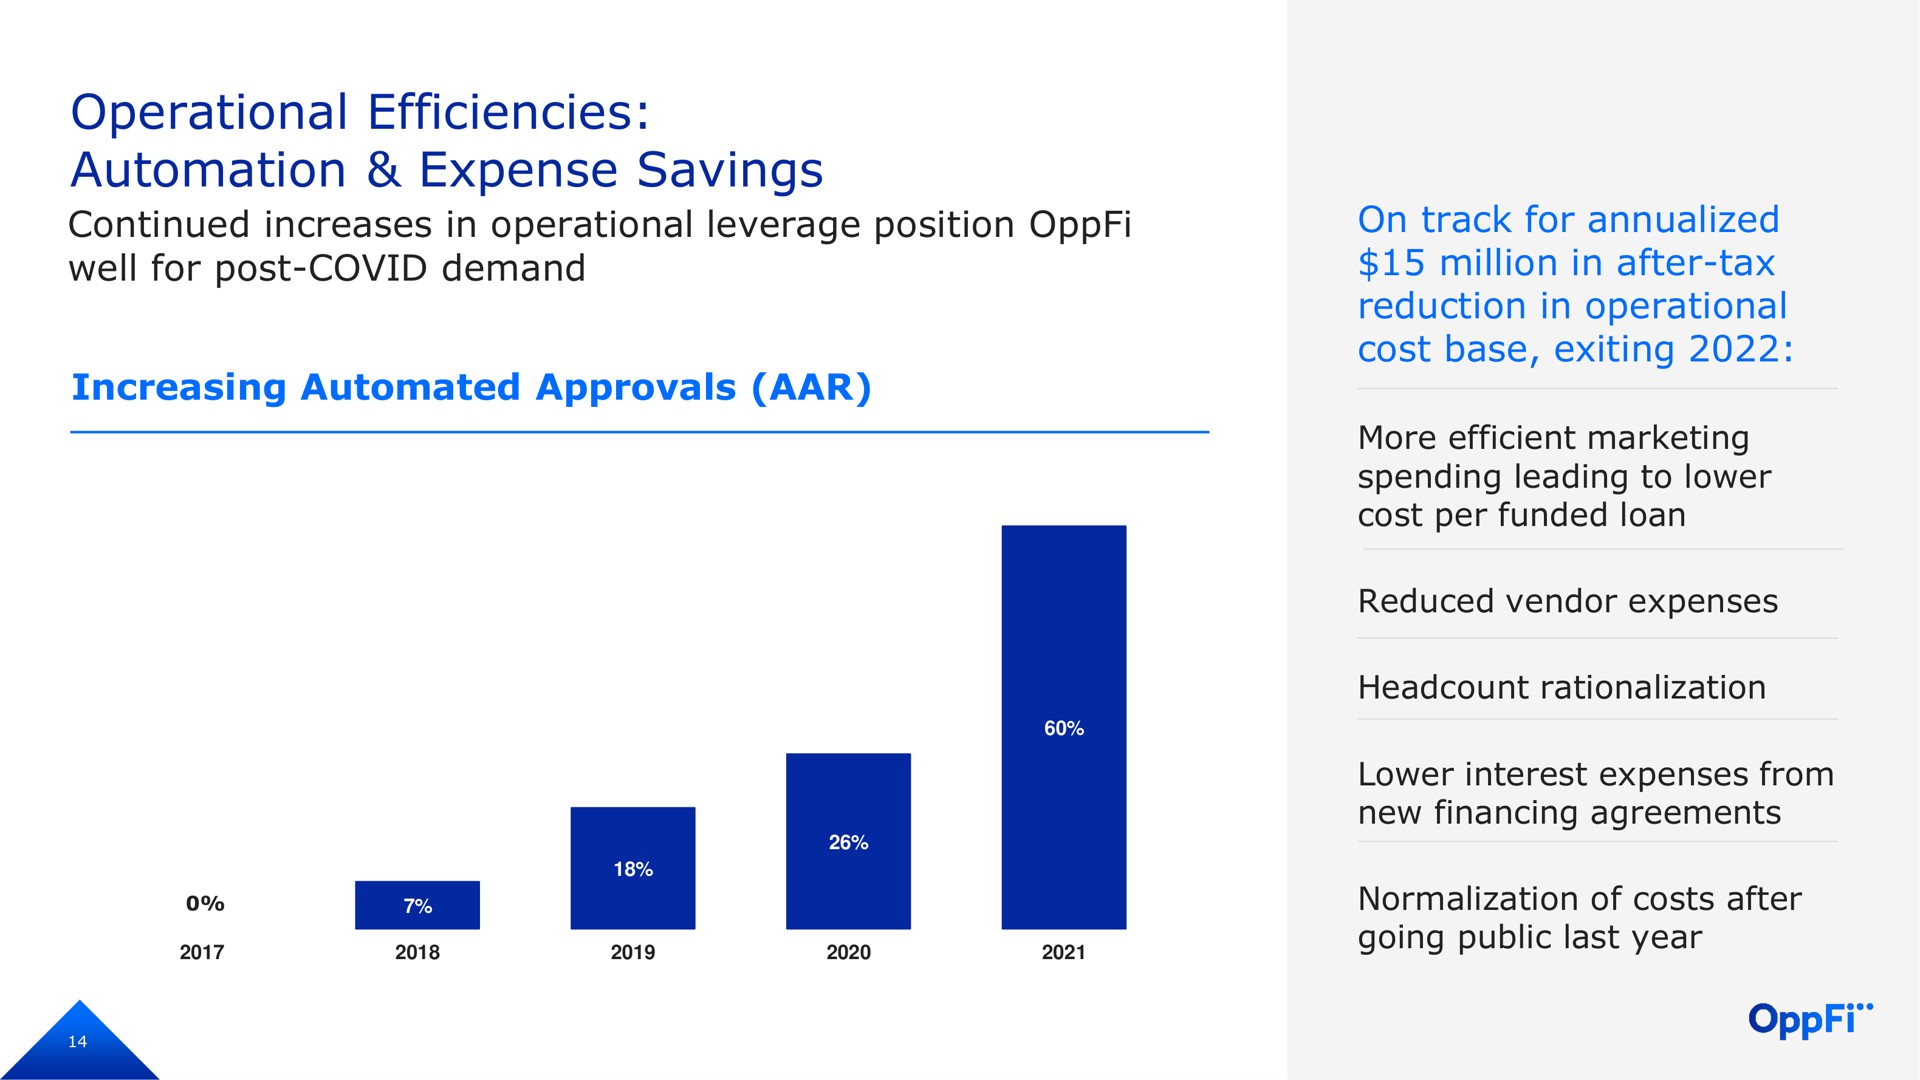 operational efficiencies expense savings continued increases in operational leverage position well for post covid demand increasing approvals on track for million in after tax reduction in operational cost base exiting more efficient marketing spending leading to lower cost per funded loan reduced vendor expenses rationalization lower interest expenses from new financing agreements normalization of costs after going public last year | OppFi